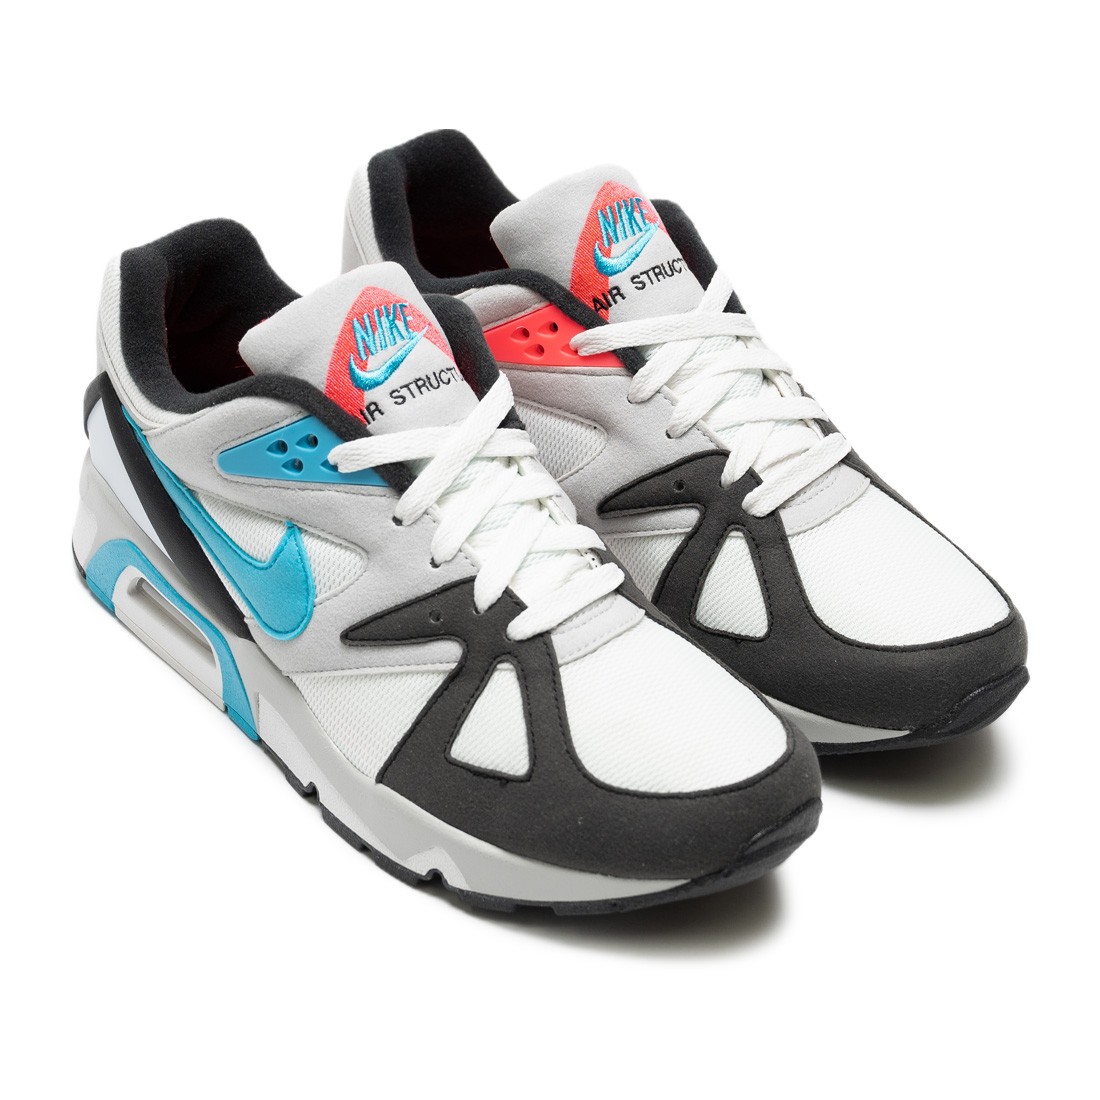 Nike Men Air Structure Og (summit white / neo teal-black-infrared)